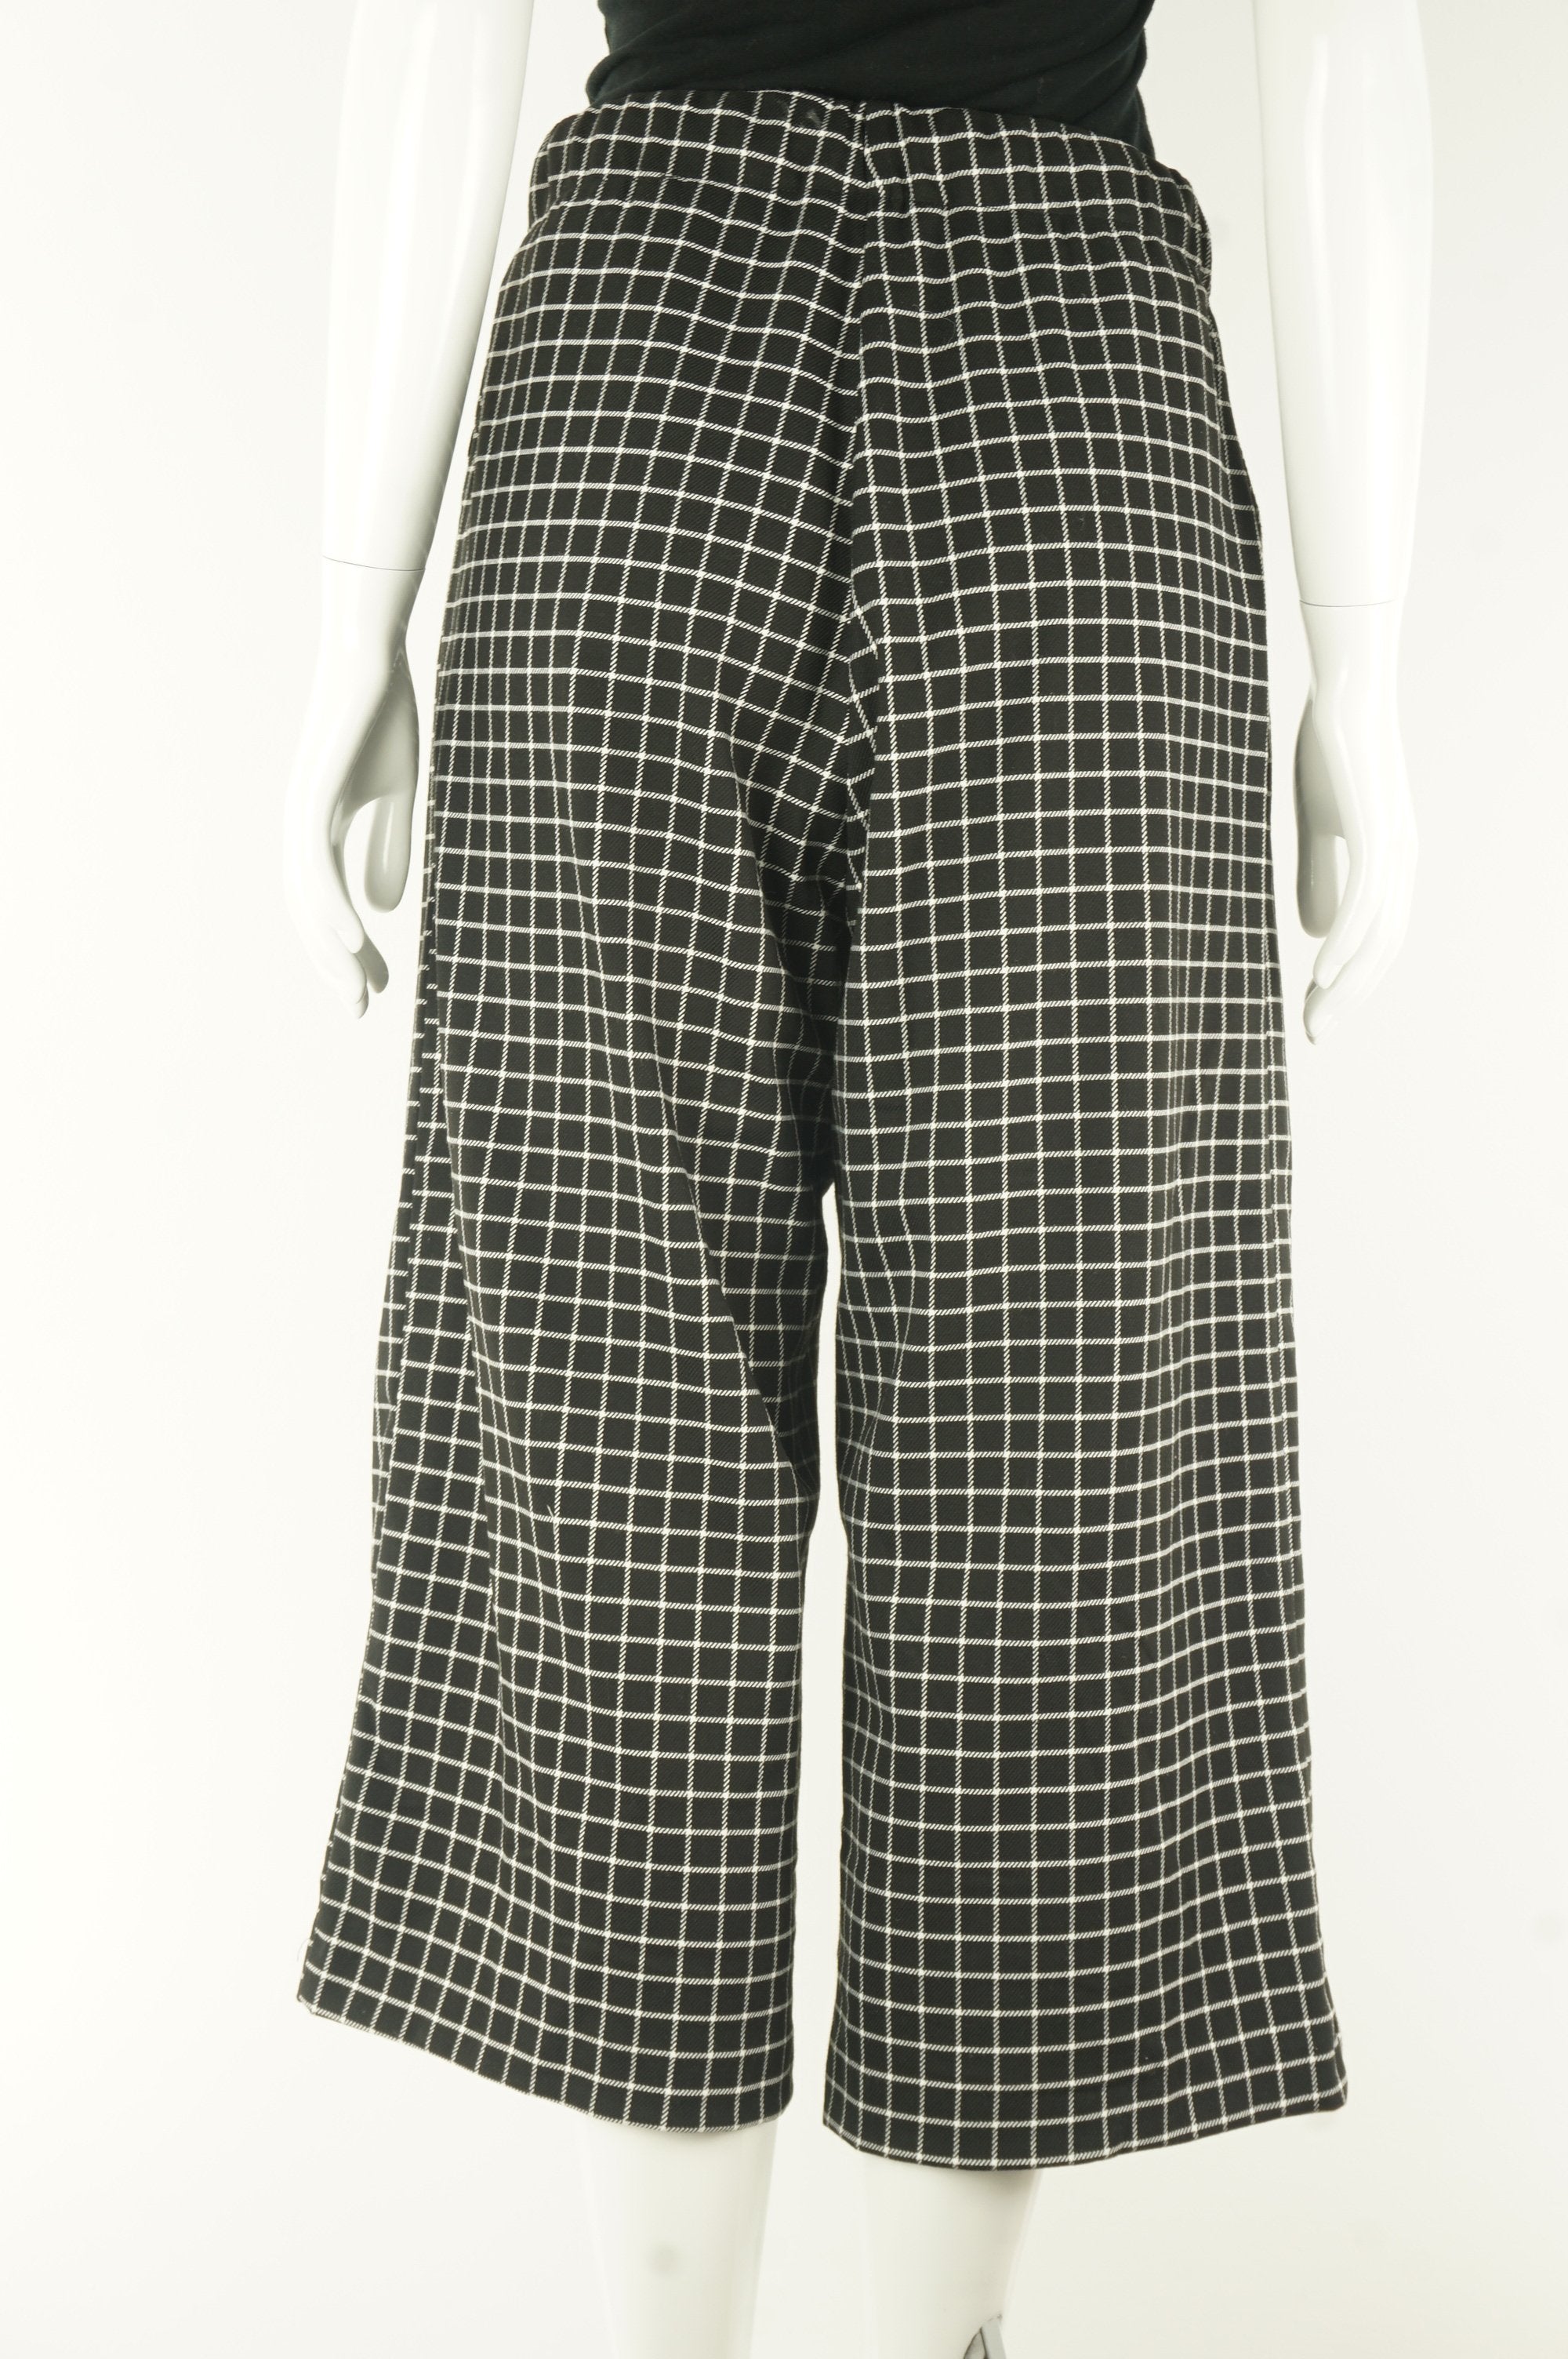 Monki Checked Wide Leg Pants With Elastic Waistband, High waisted wide legged pants are my new favorite! Why? For the exact moment after dinner when you feel overly stuffed but the pants are expandable and hides the food baby…, Black, White, 67% Polyester, 32% Viscose, 1% Elastane, women's Pants & Shorts, women's Black, White Pants & Shorts, Monki women's Pants & Shorts, Women's wide legged pants, women's loose pants